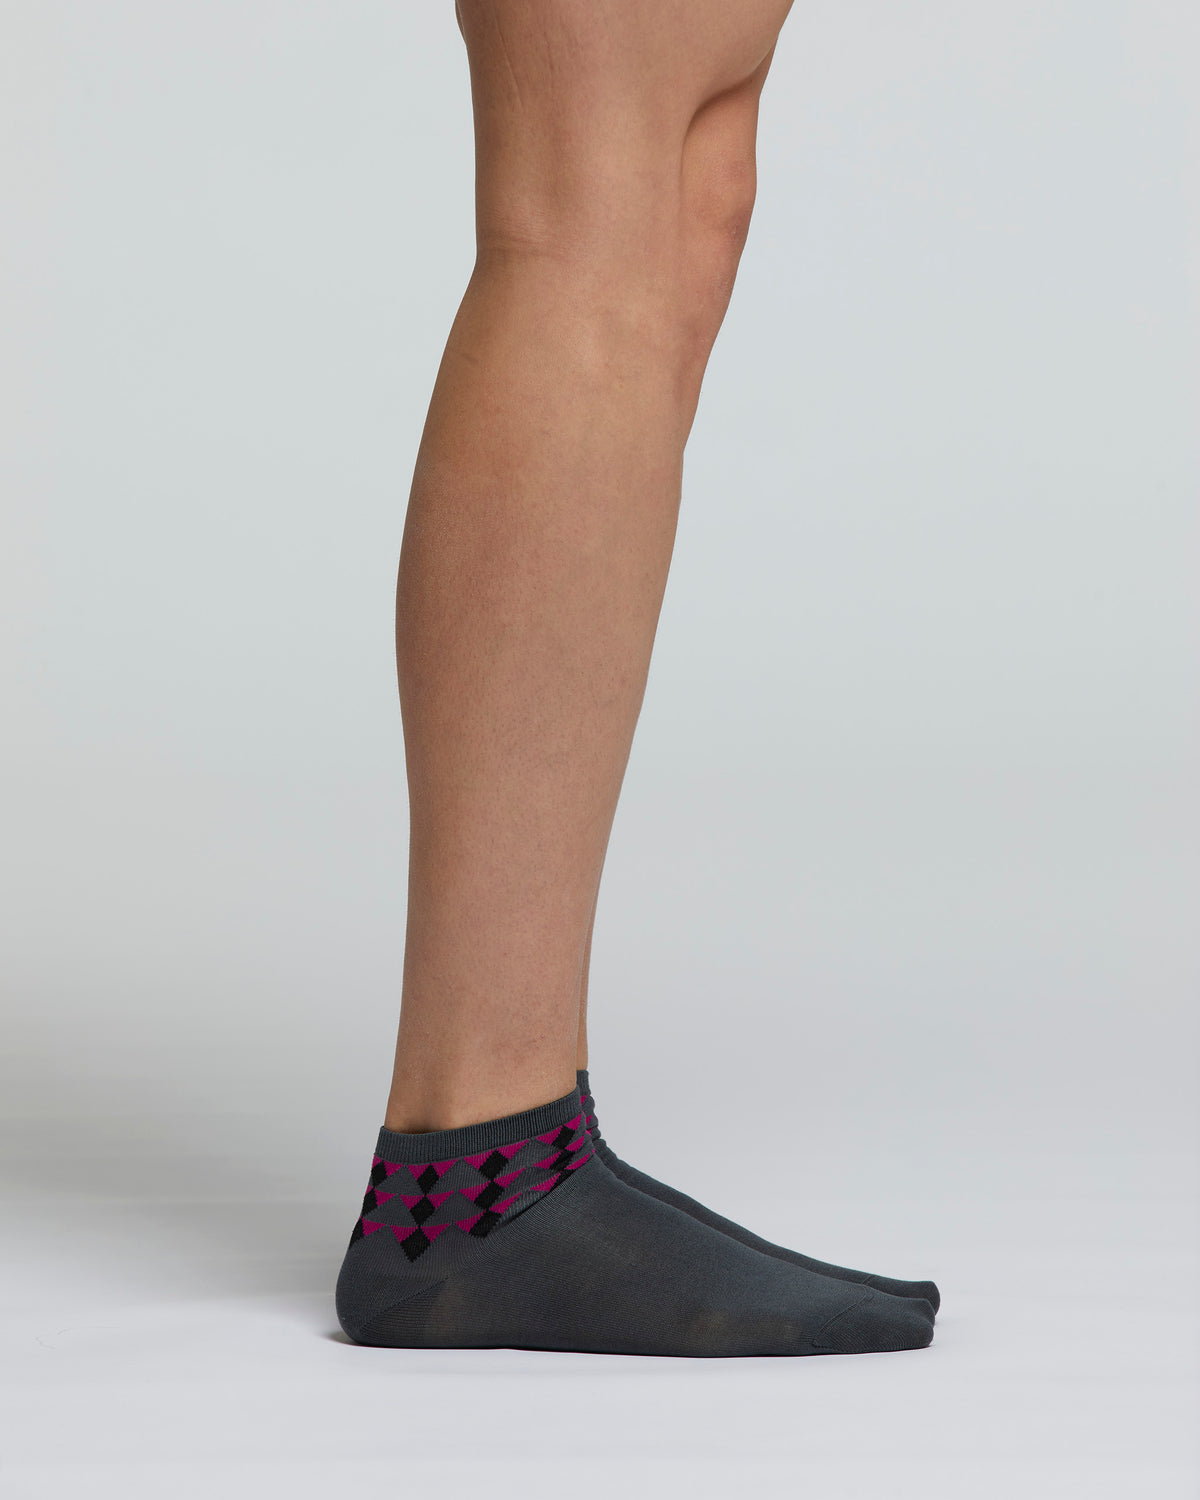 BAMBÙ SOCKS WITH ANKLE COLOURED PATTERN 